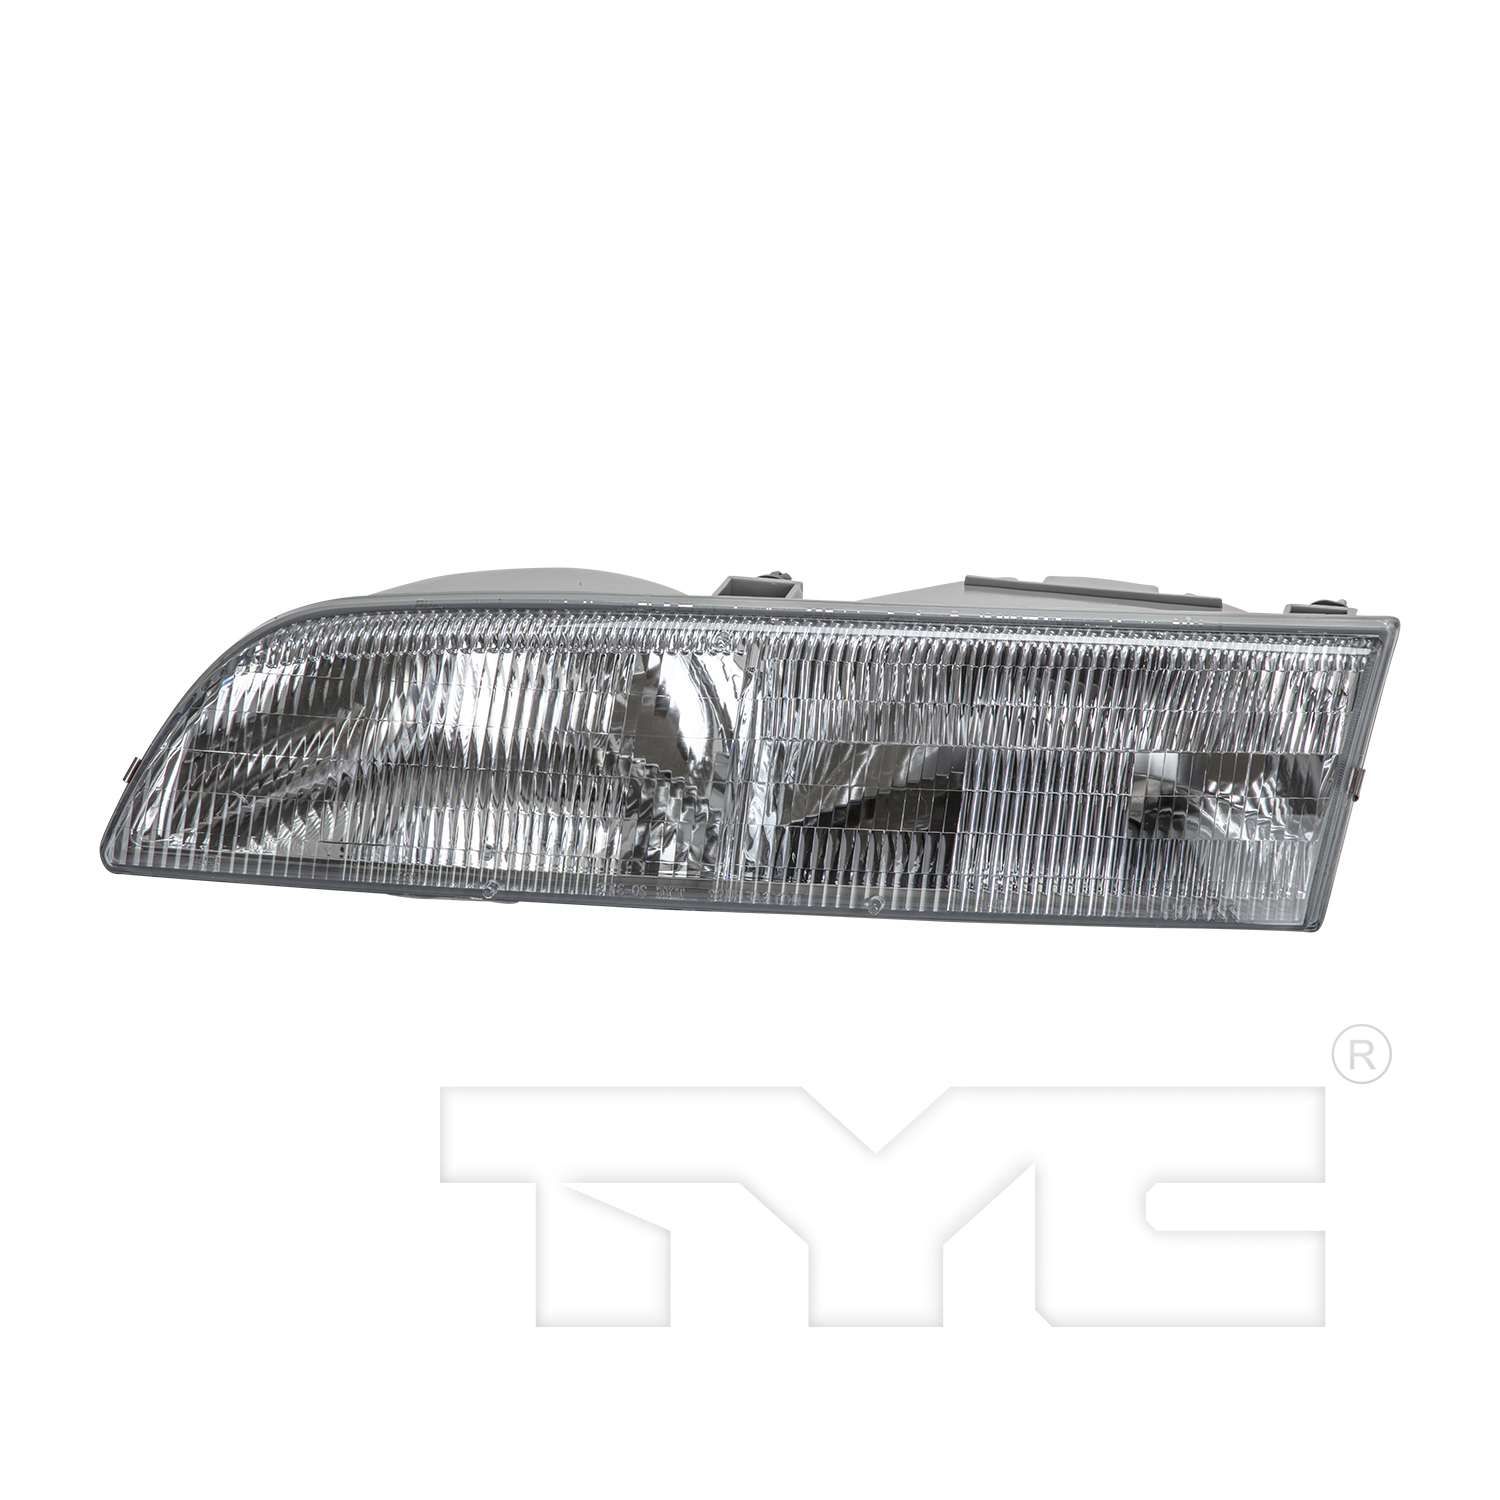 Aftermarket HEADLIGHTS for FORD - CROWN VICTORIA, CROWN VICTORIA,92-97,LT Headlamp assy composite